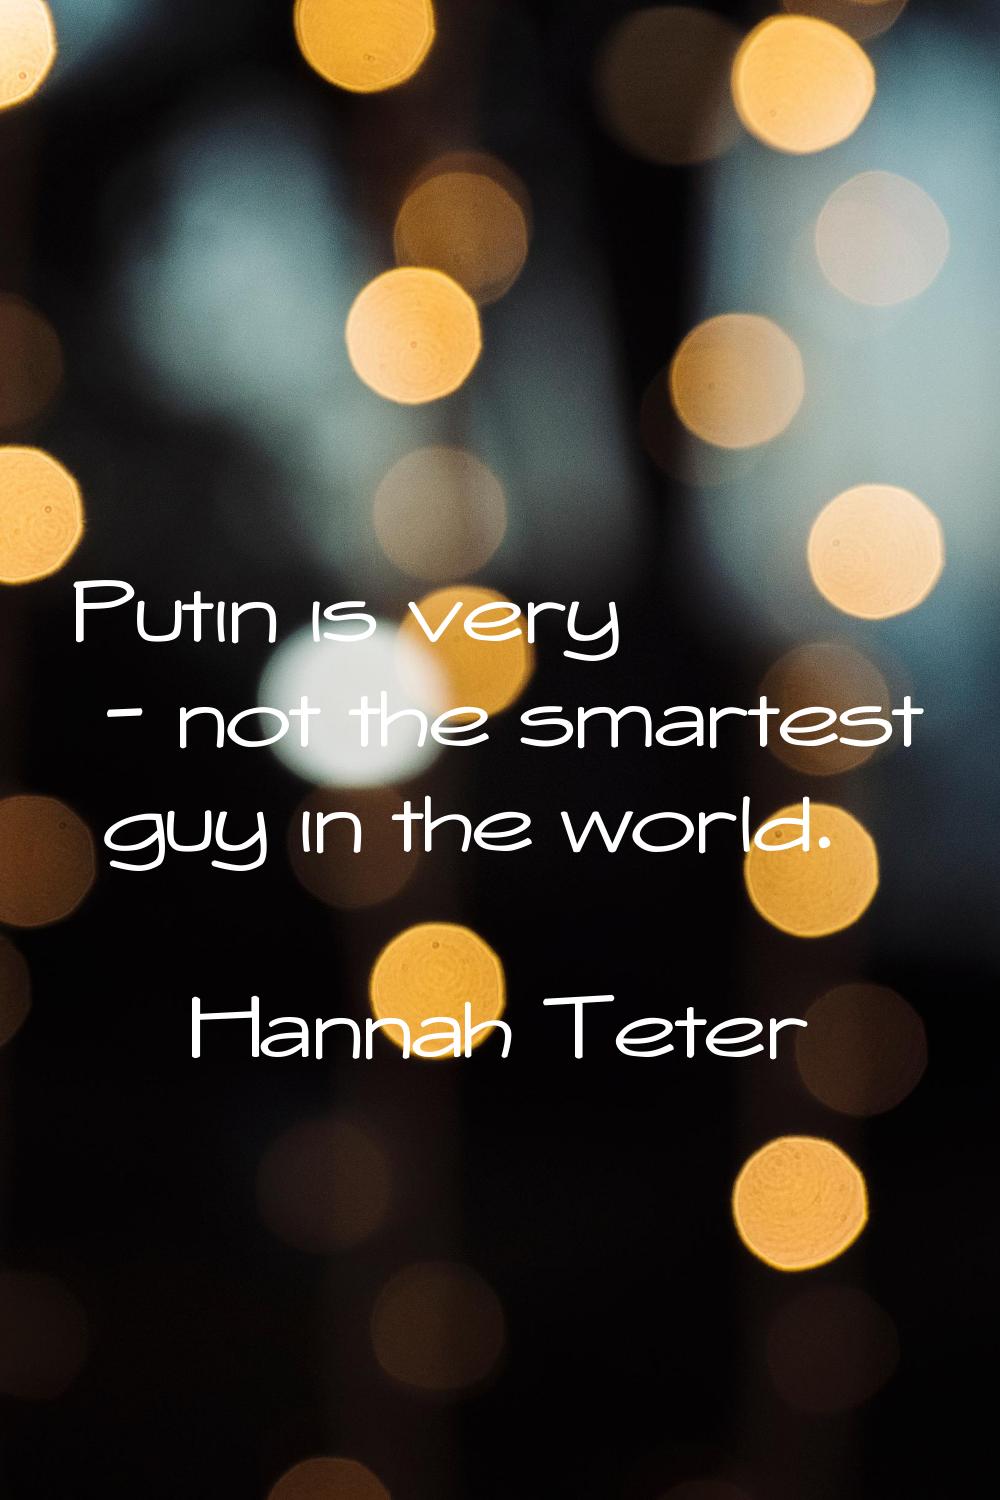 Putin is very - not the smartest guy in the world.